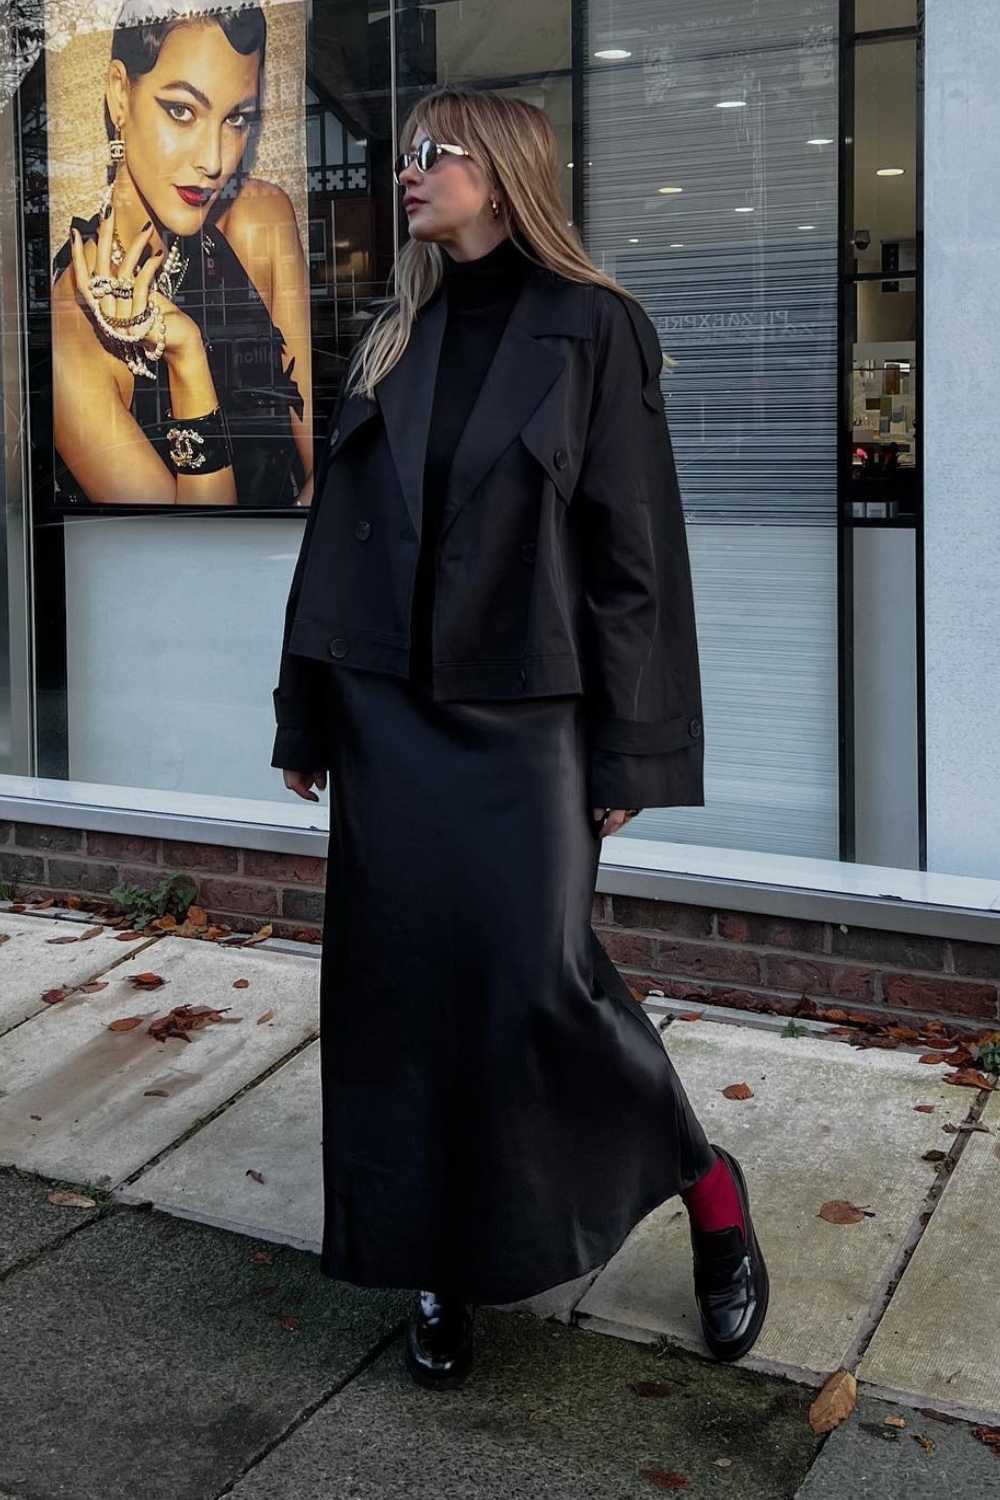 black monochrome outfits - Black Satin skirt with black jacket and sweater